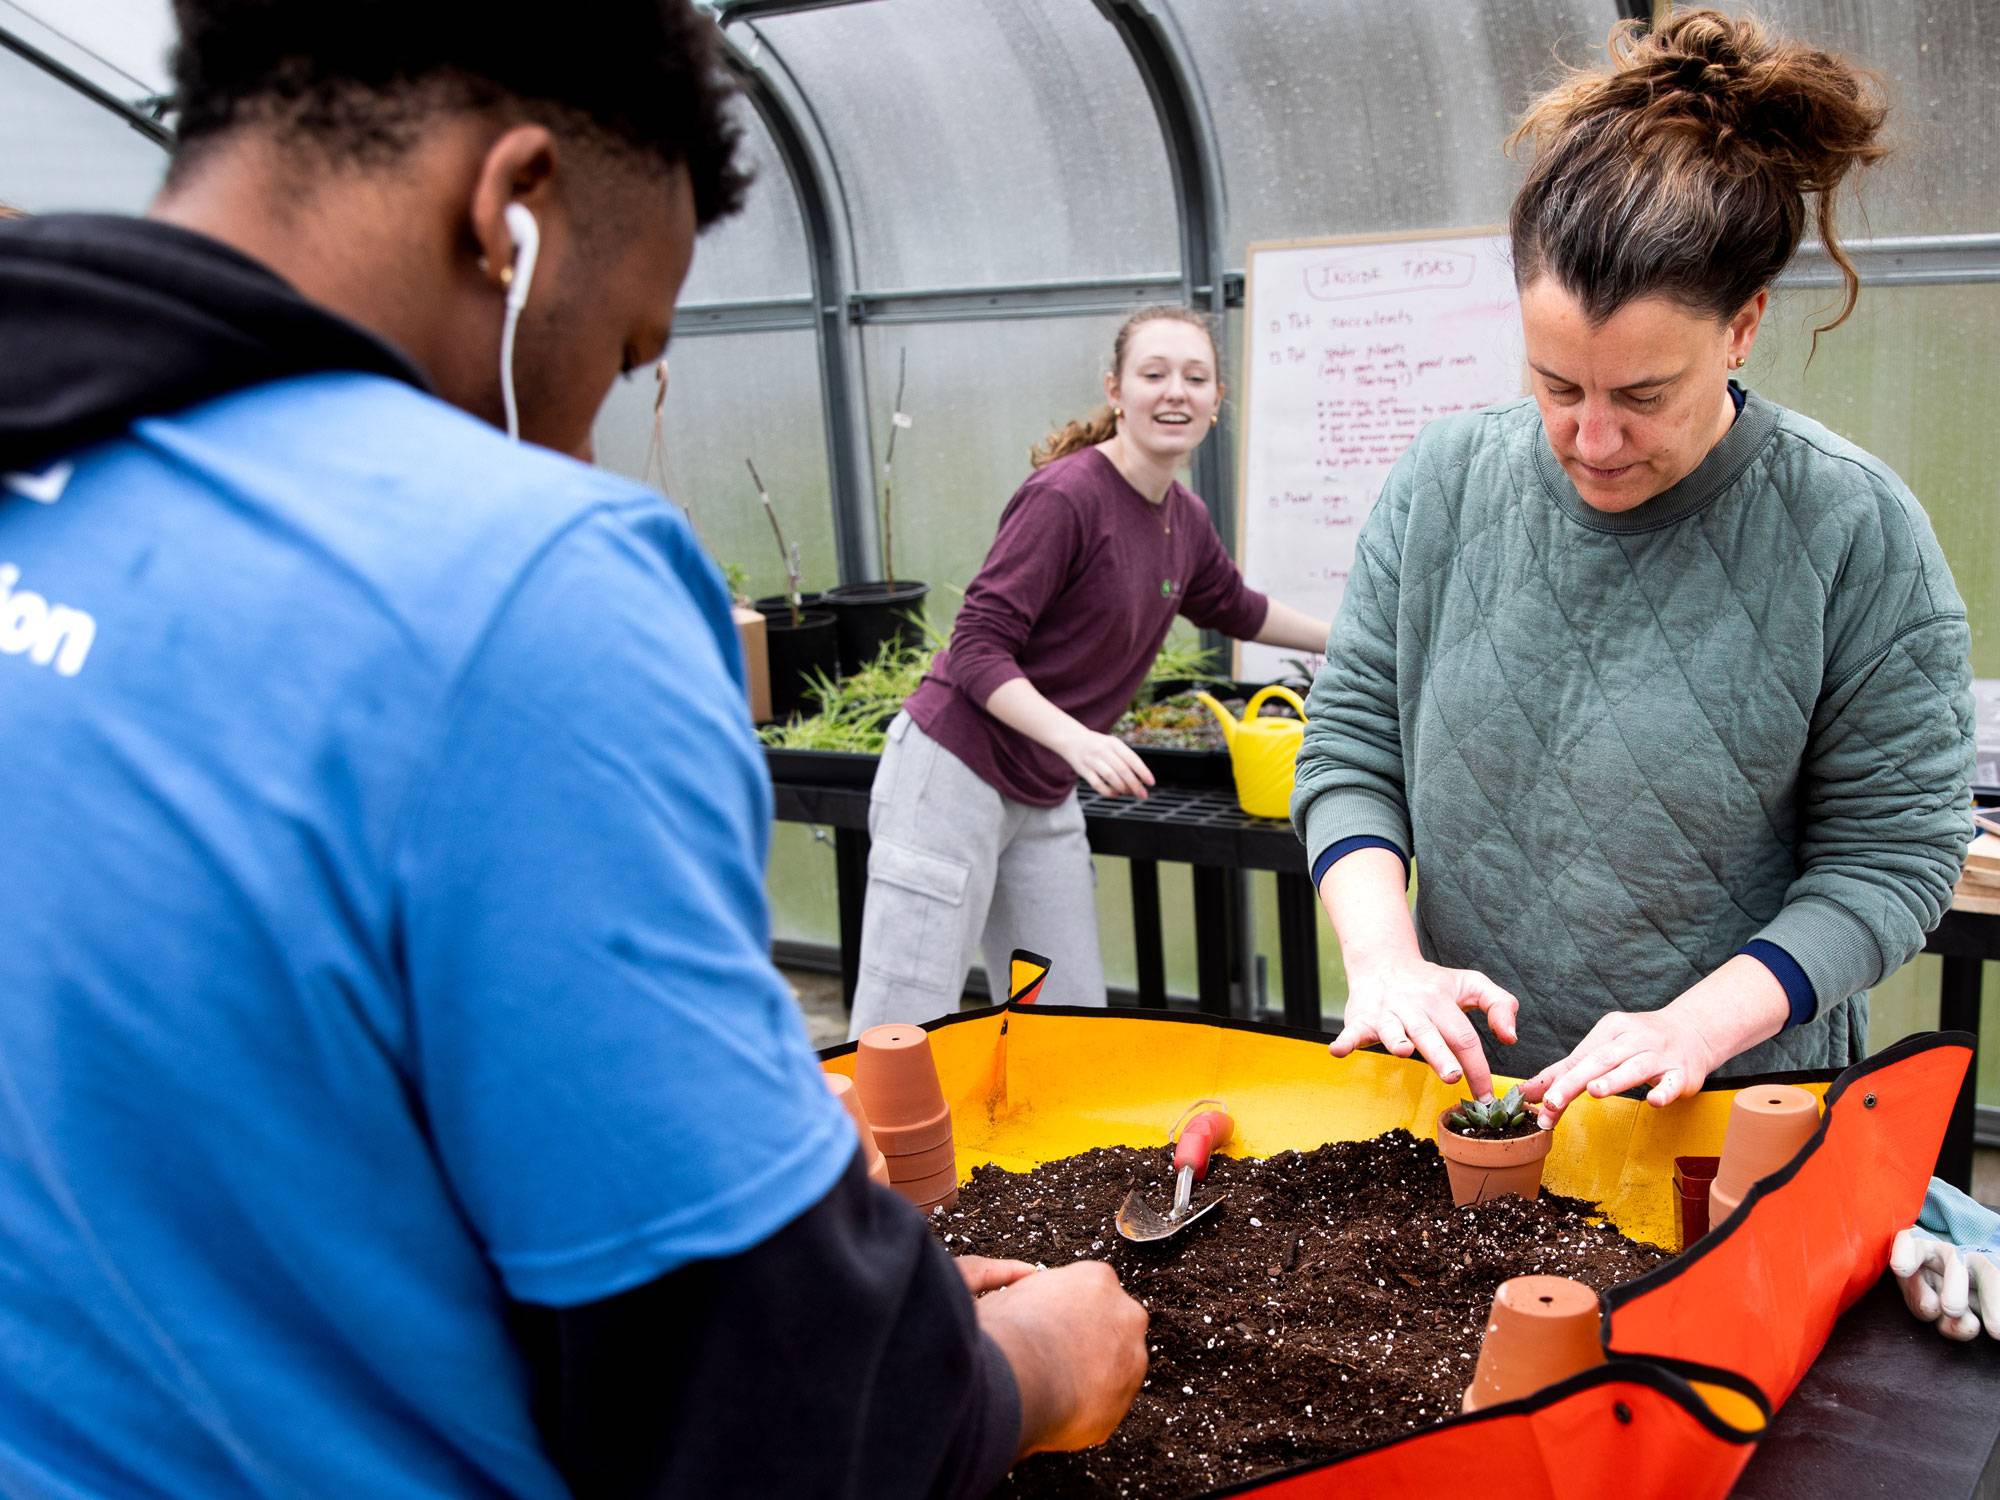 Staff and students work at garden bench while potting plants